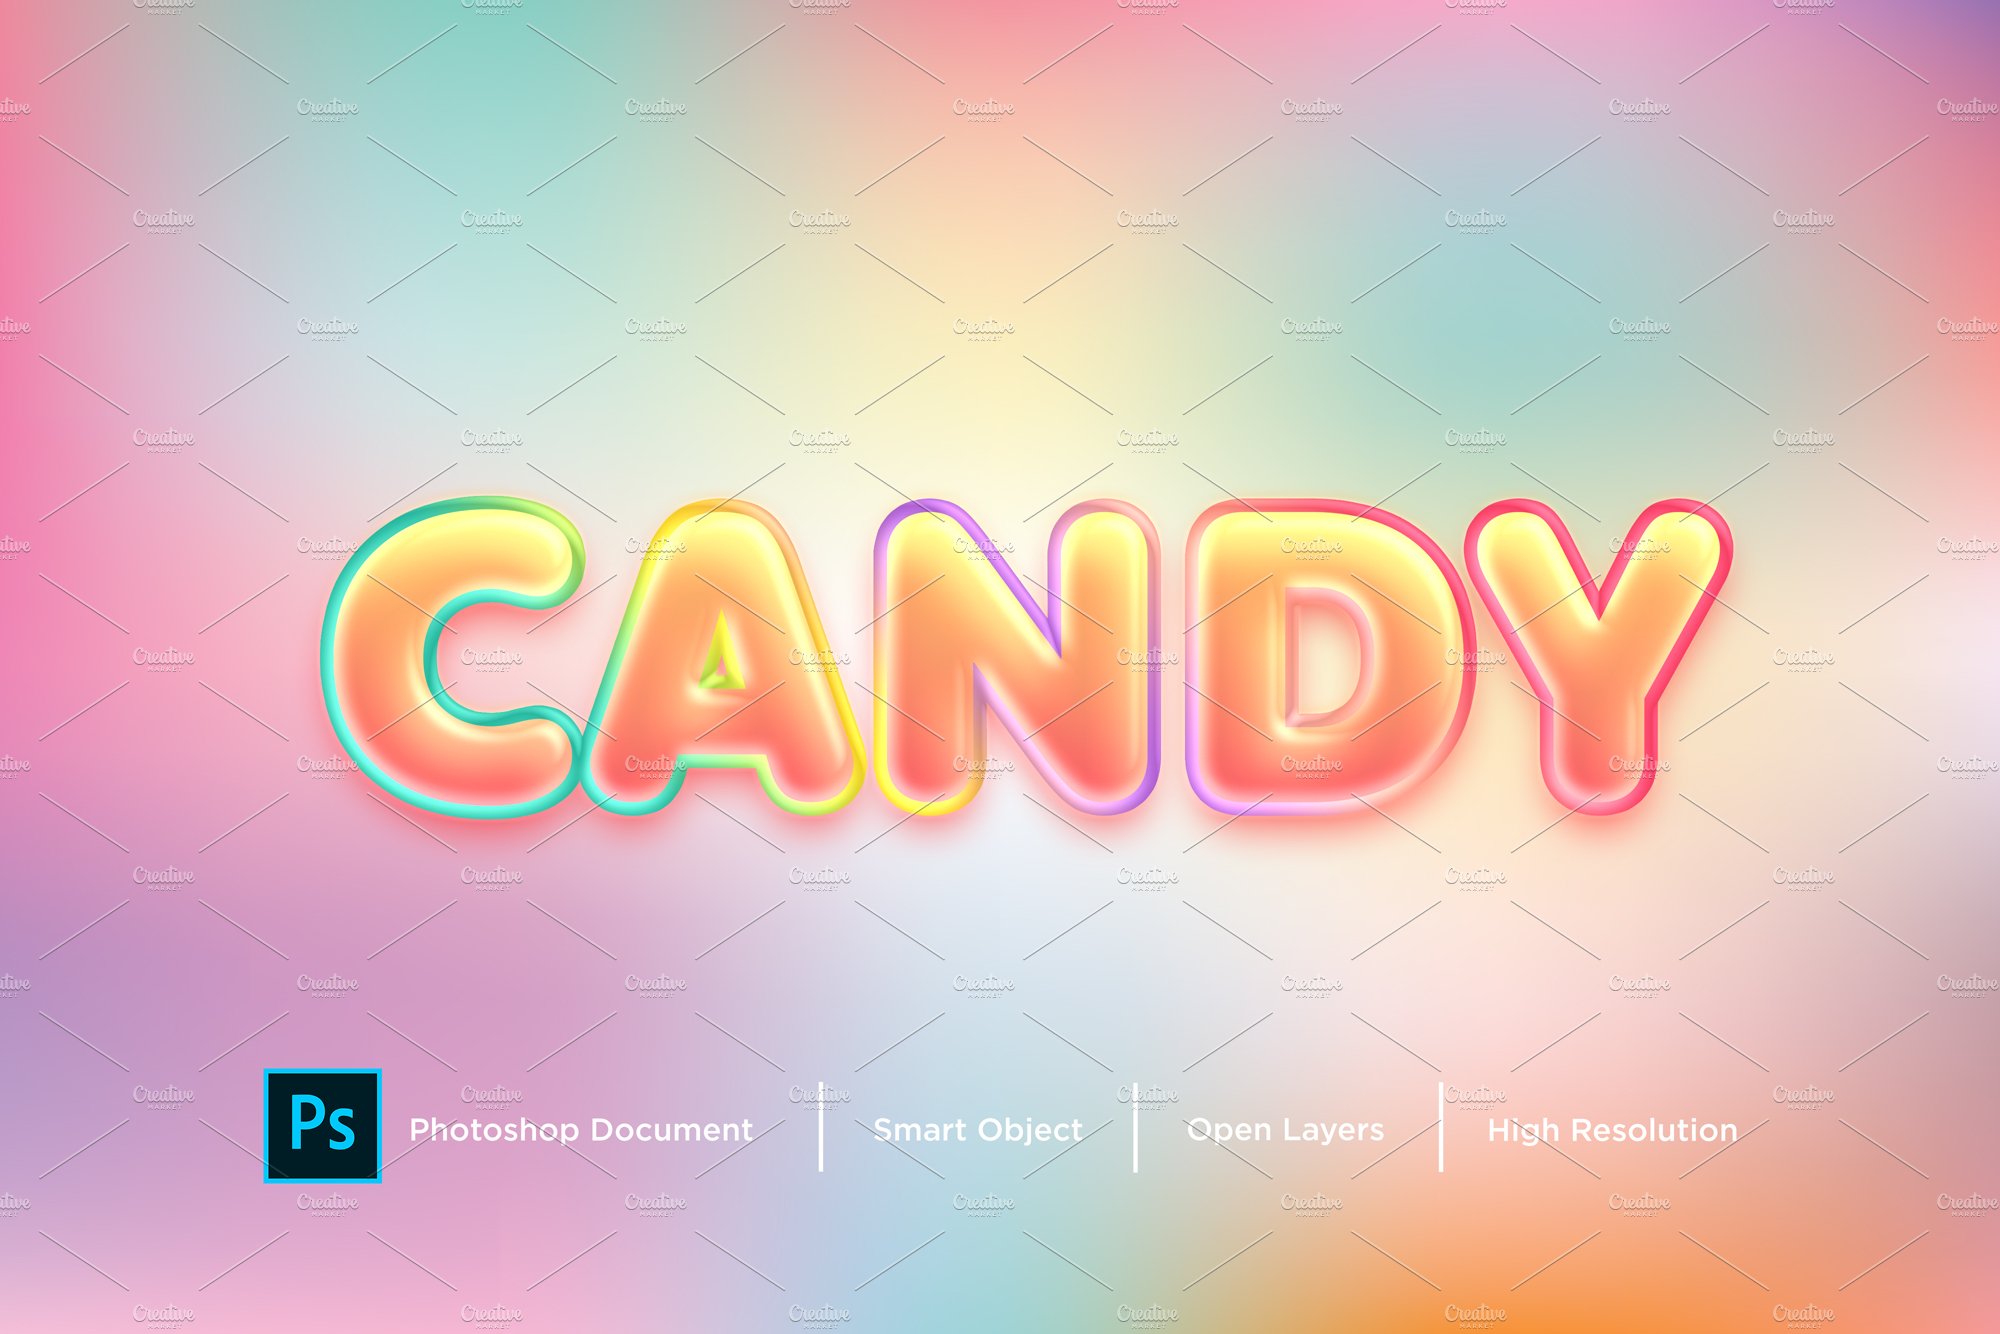 Candy Text Effect & Layer Stylecover image.